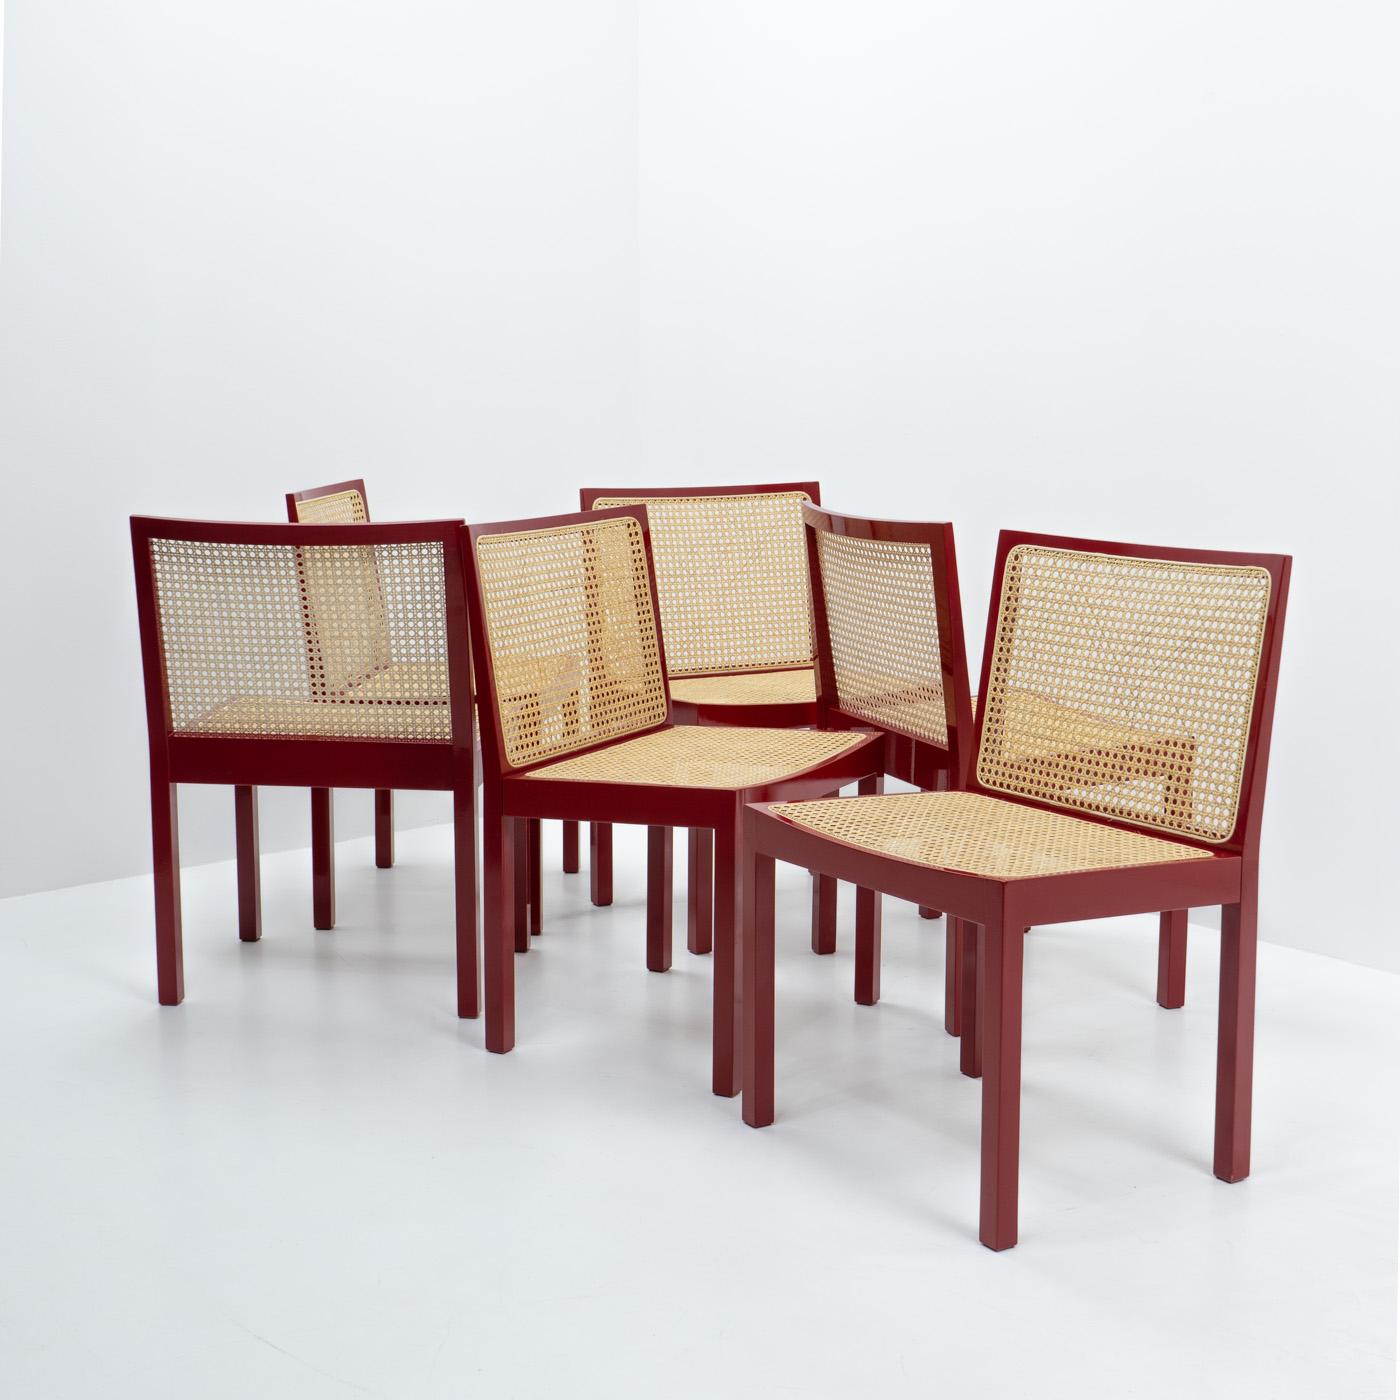 A set of of six “Bank Stühle”, or Bench Chairs by Willy Guhl (also known for the Loop Chairs for Eternit AG), produced during the 1960s in Switzerland.

The name Bench Chair is derived from the idea that the these chairs can be placed alongside each